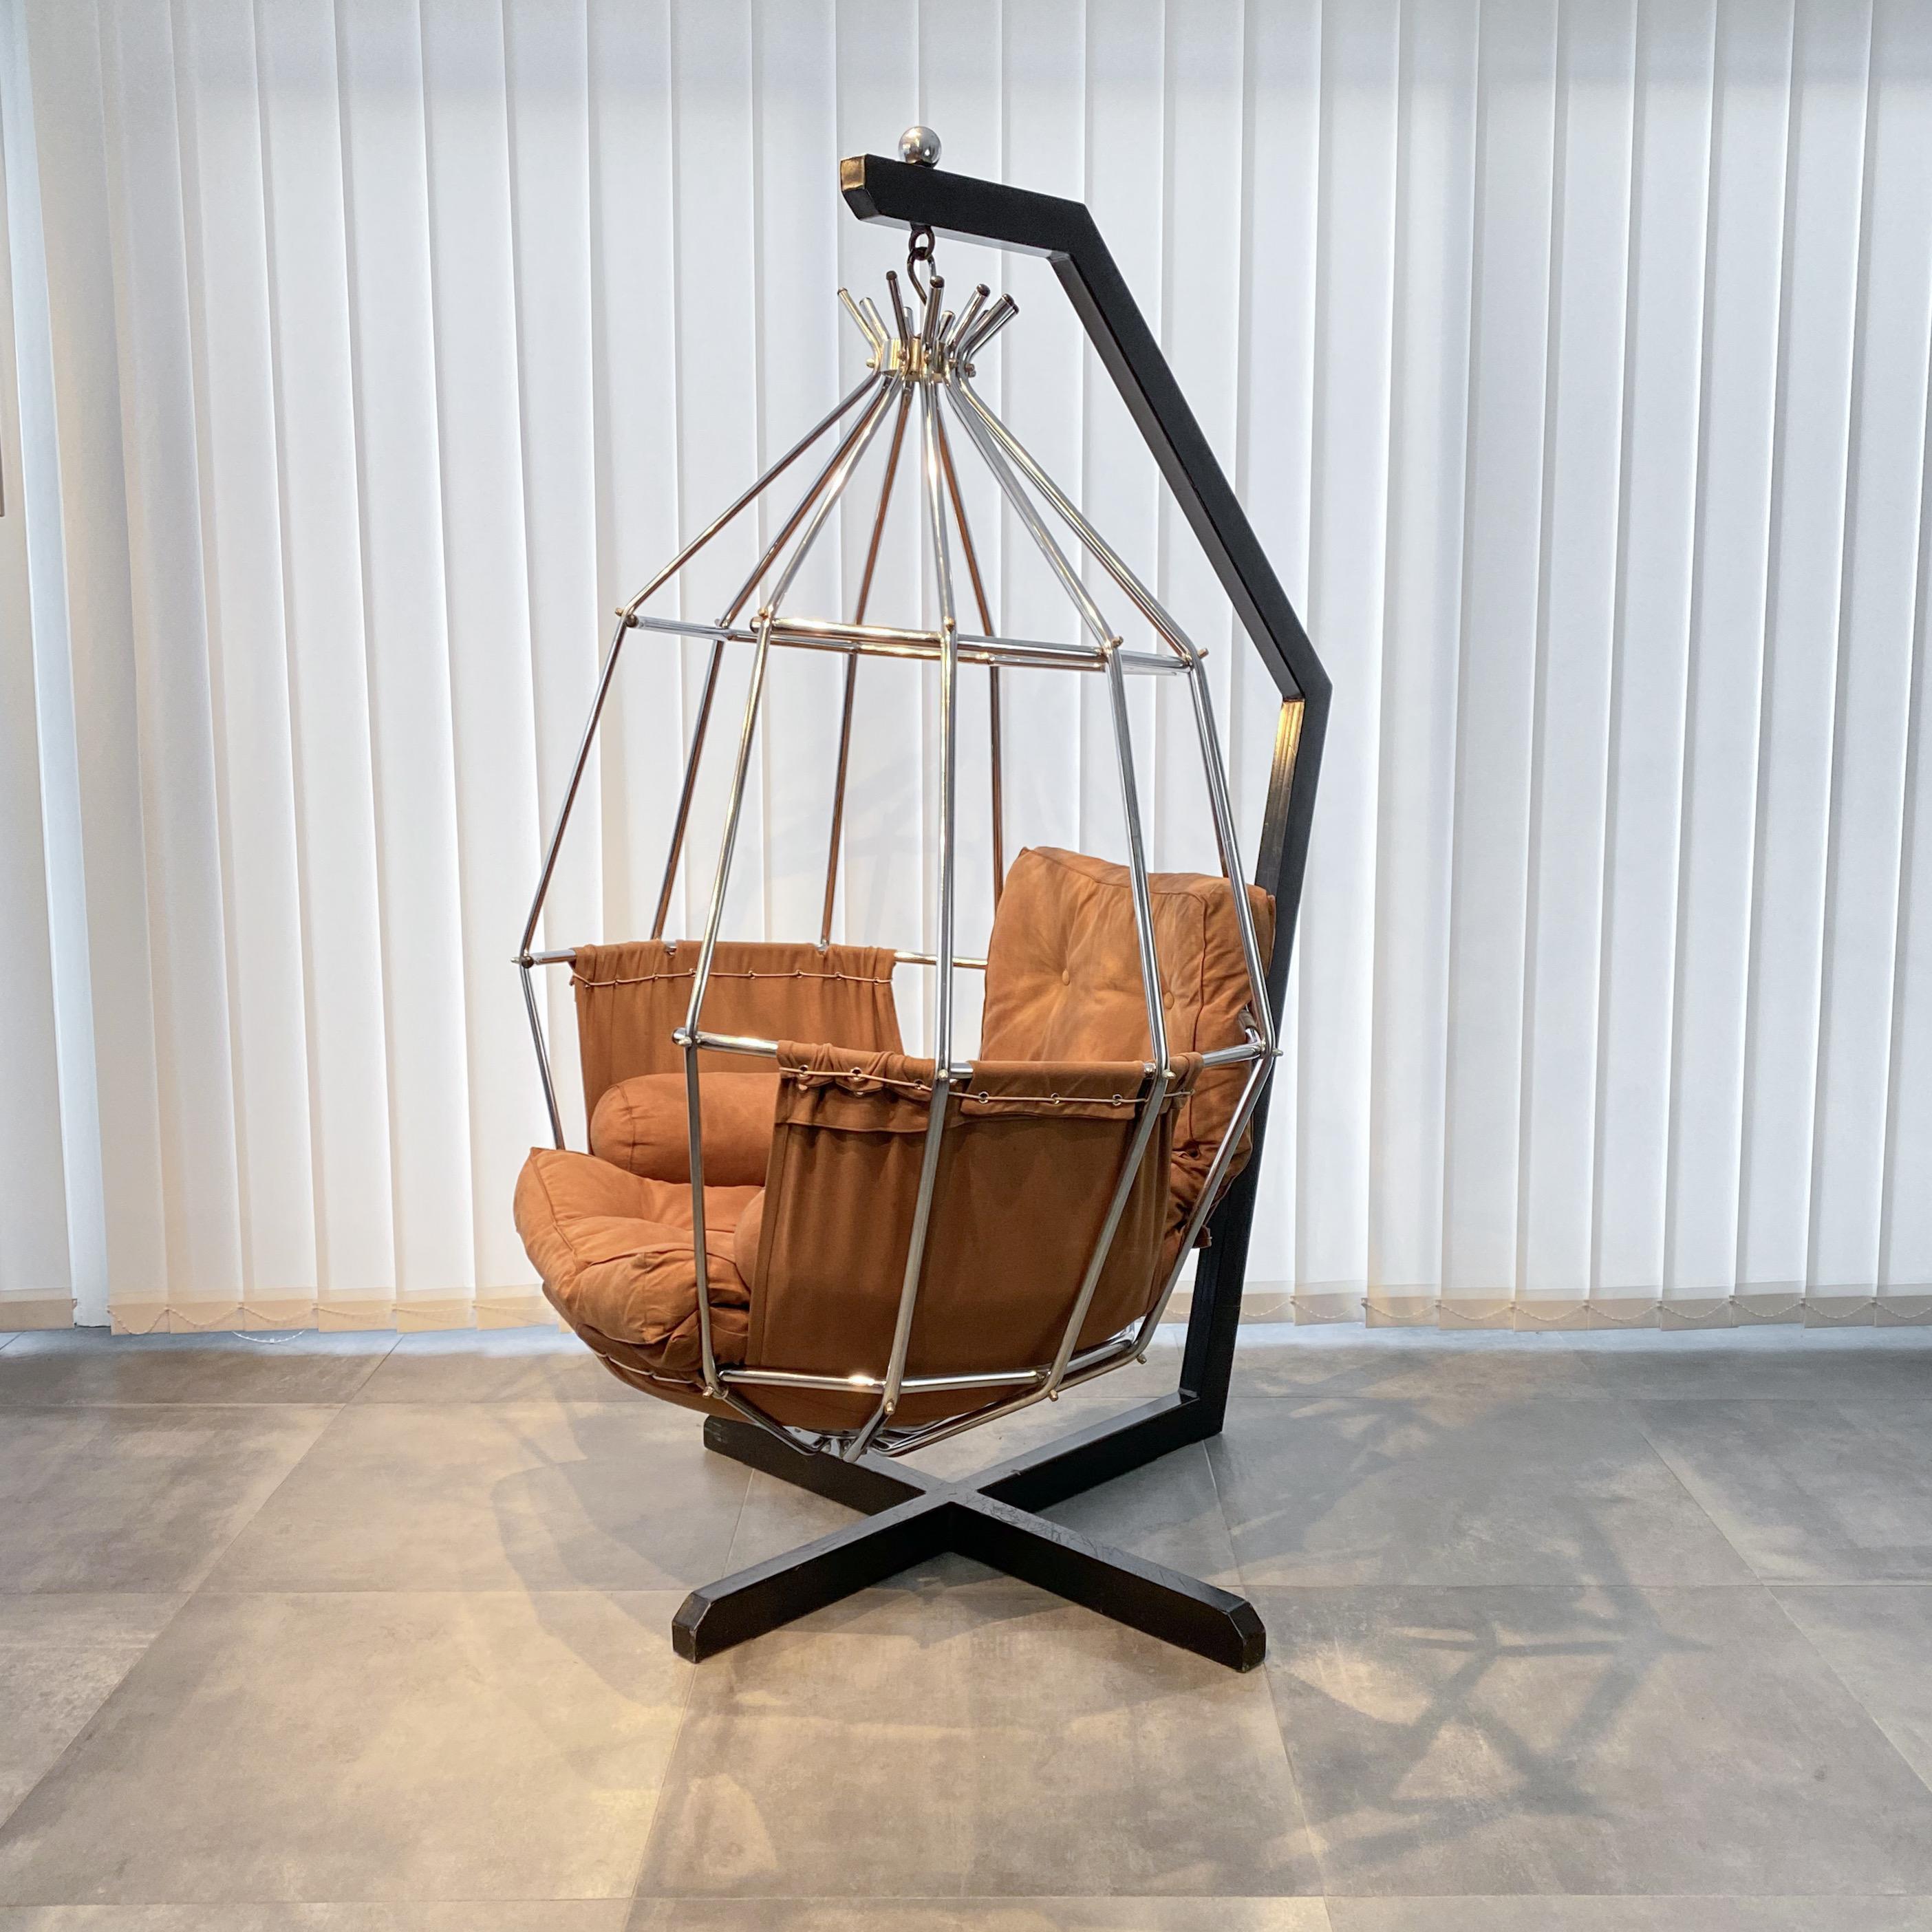 Hanging easy chair Gojan, designed by the Danish architect Ib Arberg for the Swedish manufacturer ABRA Möbler. This remarkable chair features a chrome metal cage suspended from a black steel base. It retains its original textile upholstery, complete